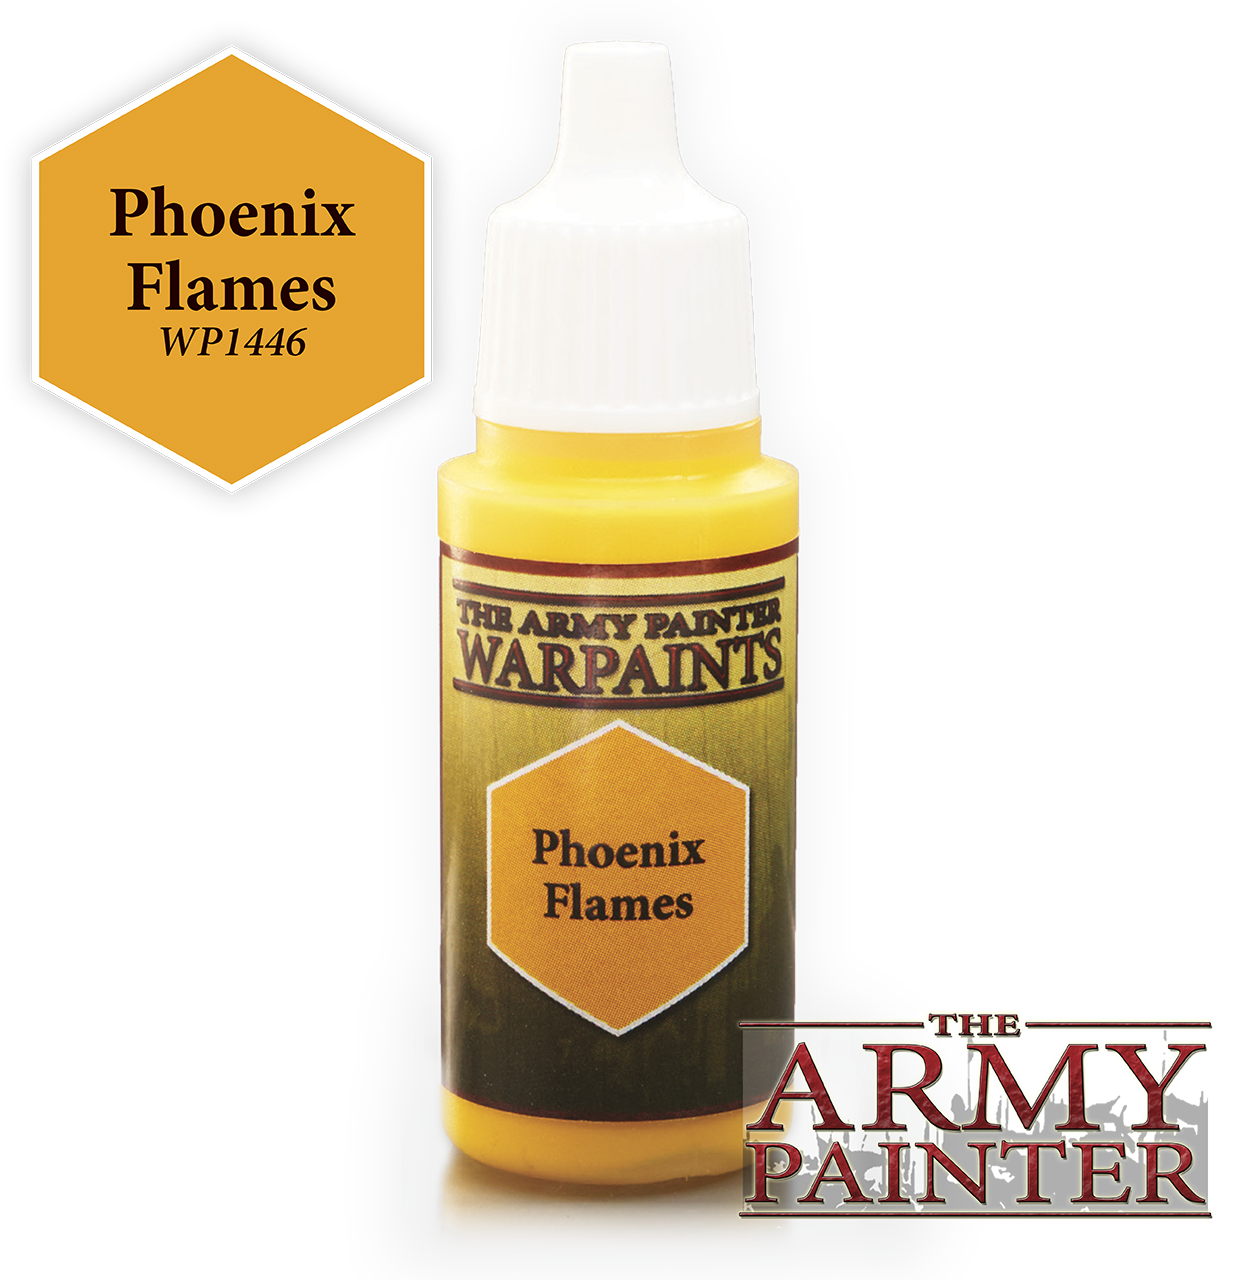 The ARMY PAINTER: Acrylics Warpaint - Phoenix Flames | Tacoma Games